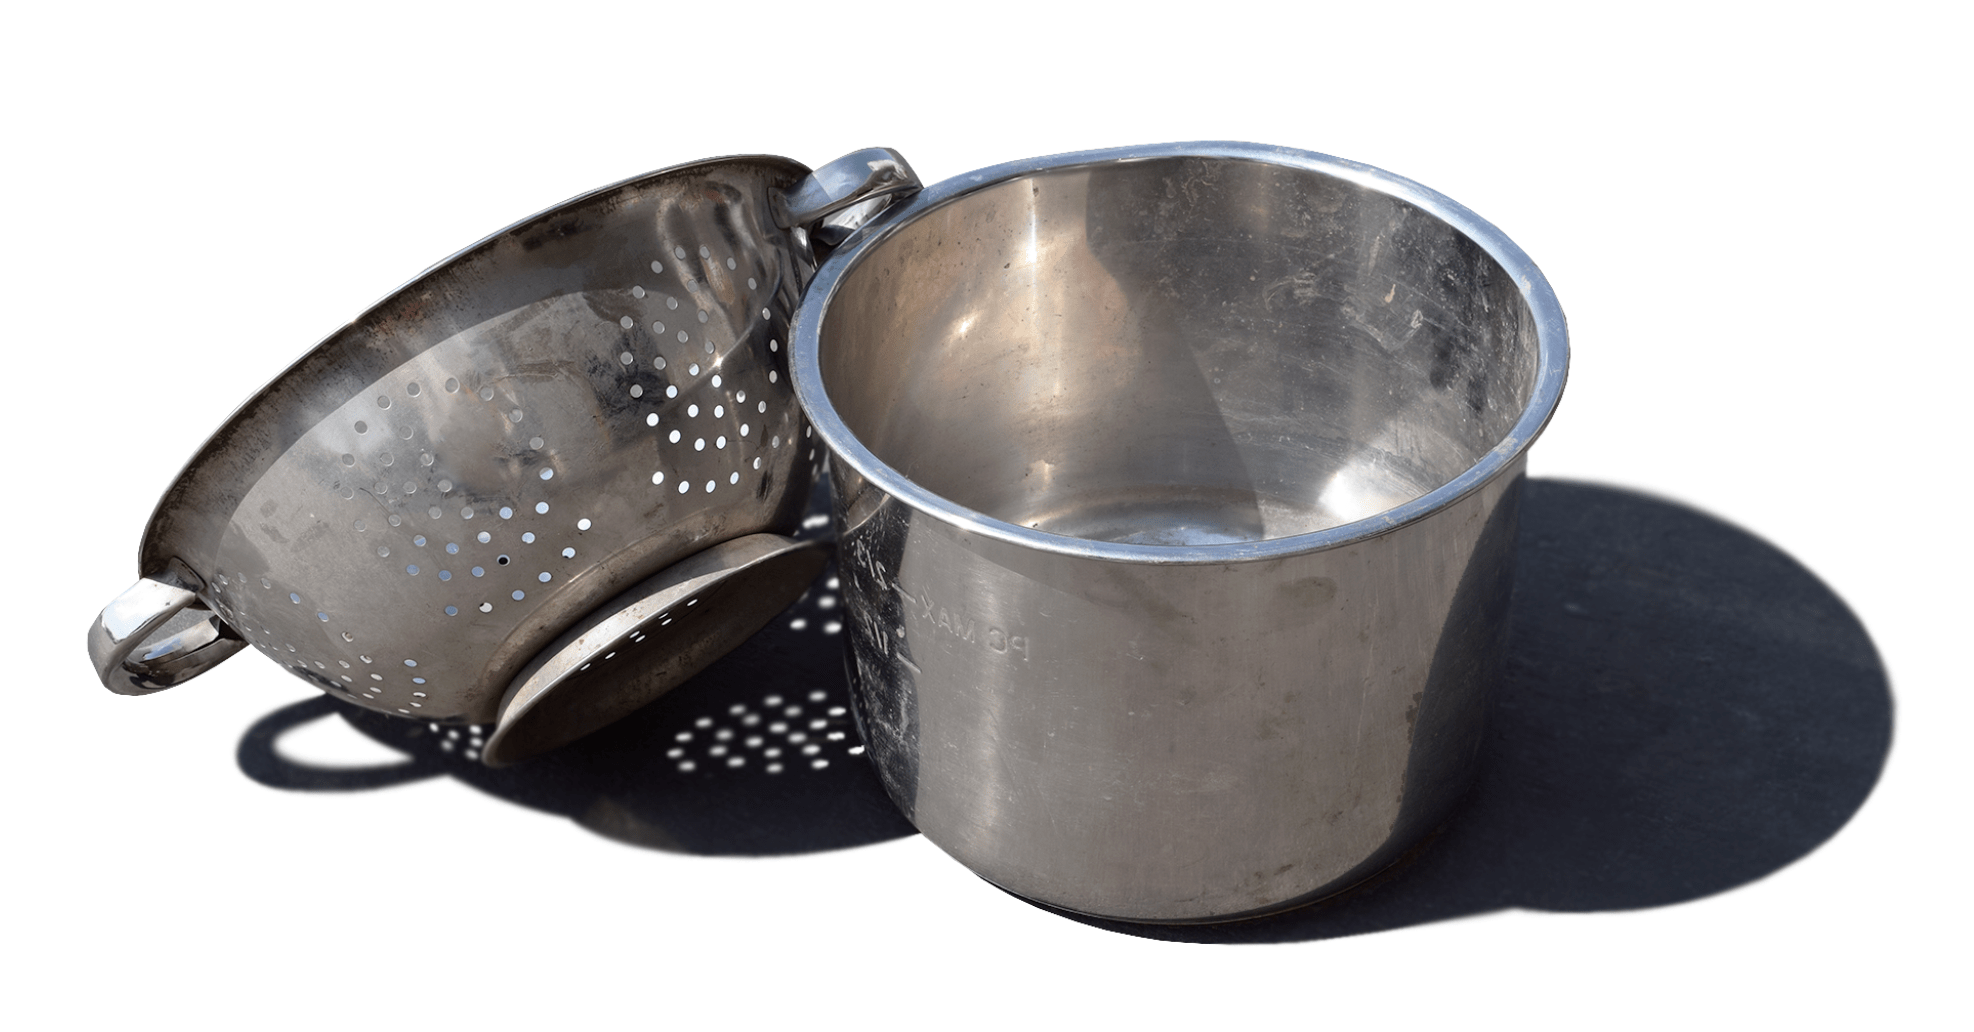 A stainless steel colander and pot, perfect for straining and cooking.